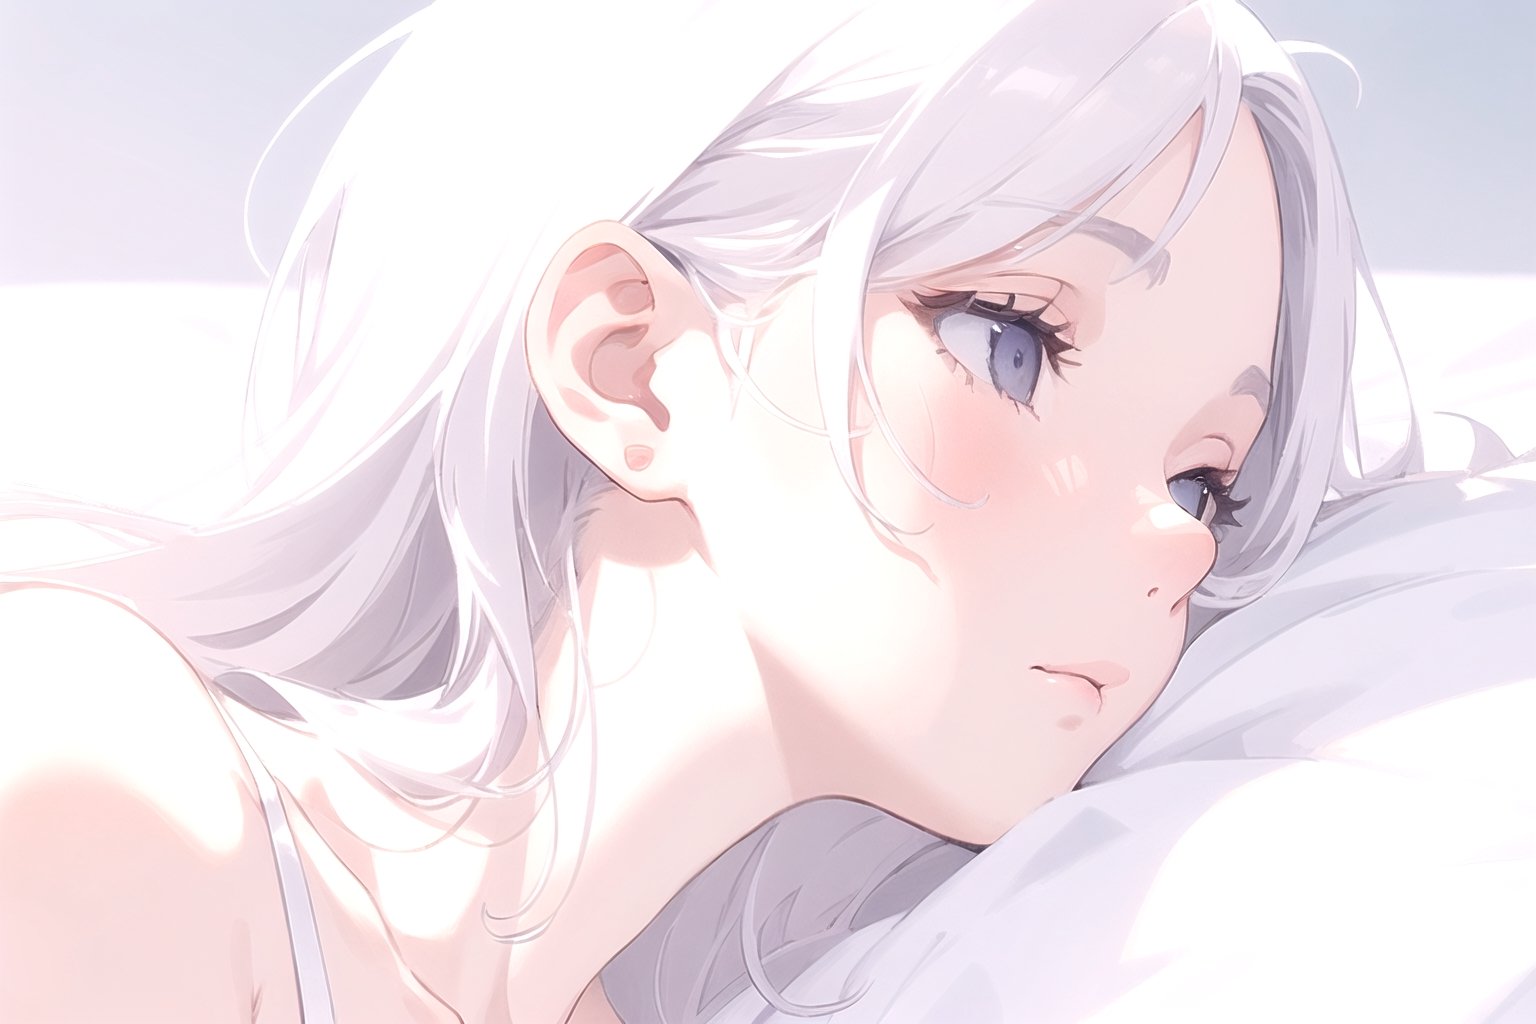 masterpiece, best quality, extremely detailed, Female profile, Delicate features, Serene expression, Slightly sleepy eyes, Soft skin texture, Ear visible, White attire, Subtle gradient background, High resolution, Realistic rendering, on the bed,Cute girl